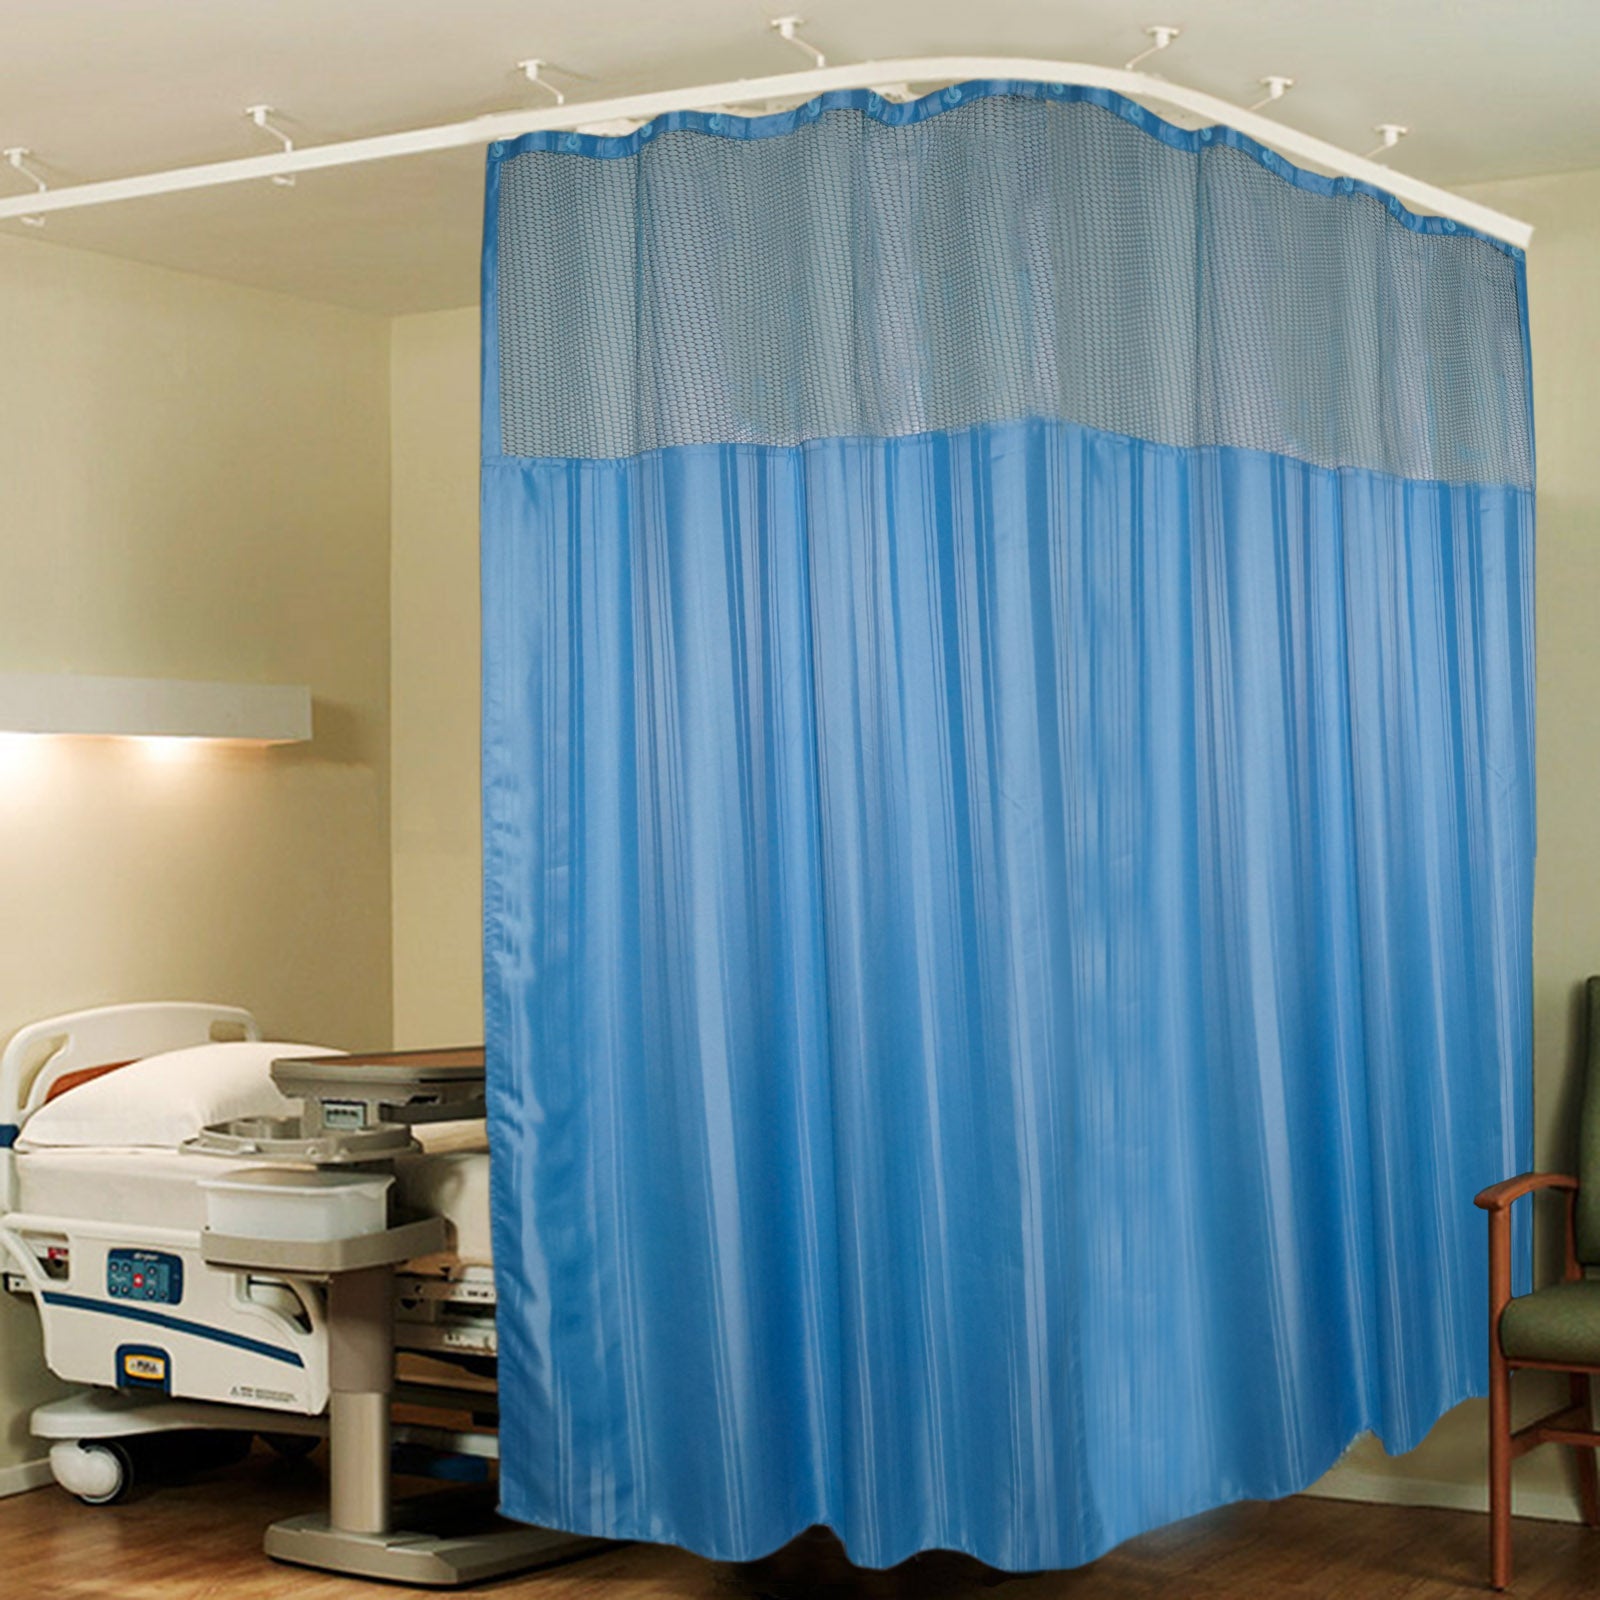 Hospital Partition Curtains, Clinic Curtains Size 10 FT W x 7 ft H, Channel Curtains with Net Fabric, 100% polyester 20 Rustfree Metal Eyelets 20 Plastic Hook, Dark Blue, Stripes (10x7 FT, Pk of 1)